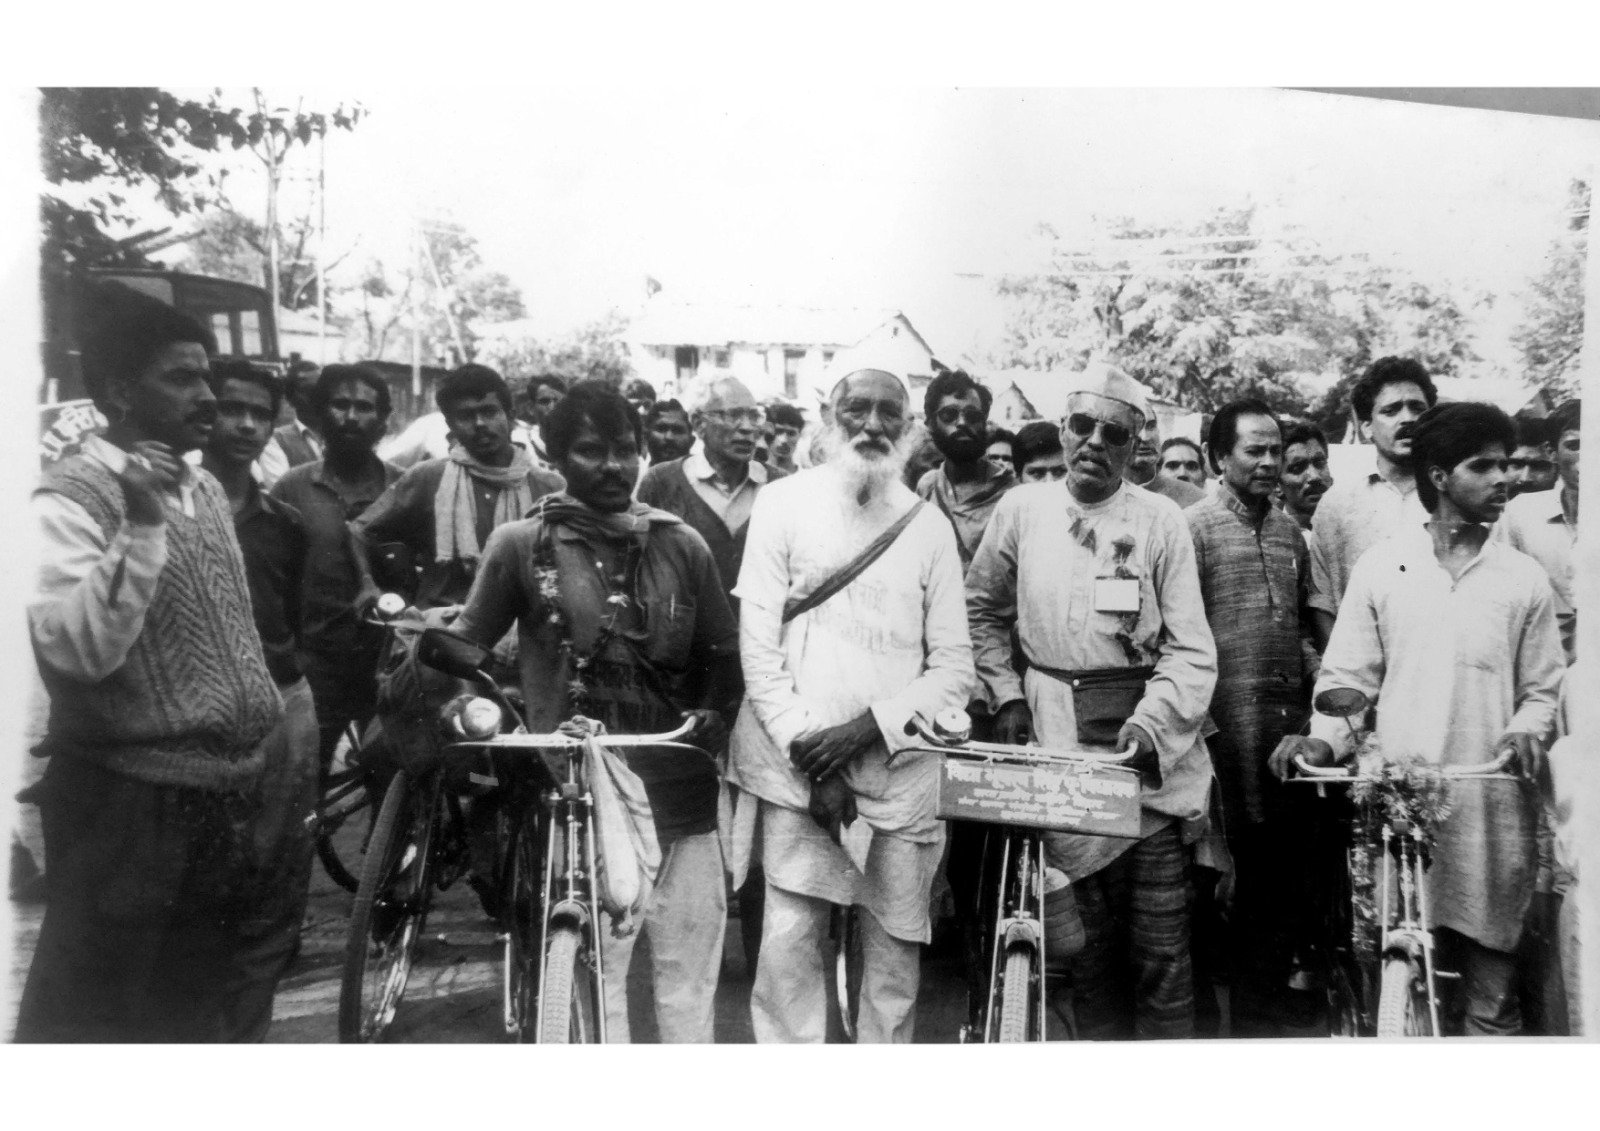  Sunderlal Bahuguna (center, in white) joins a “cycle yatra” awareness campaign for protecting the Ganges river. 